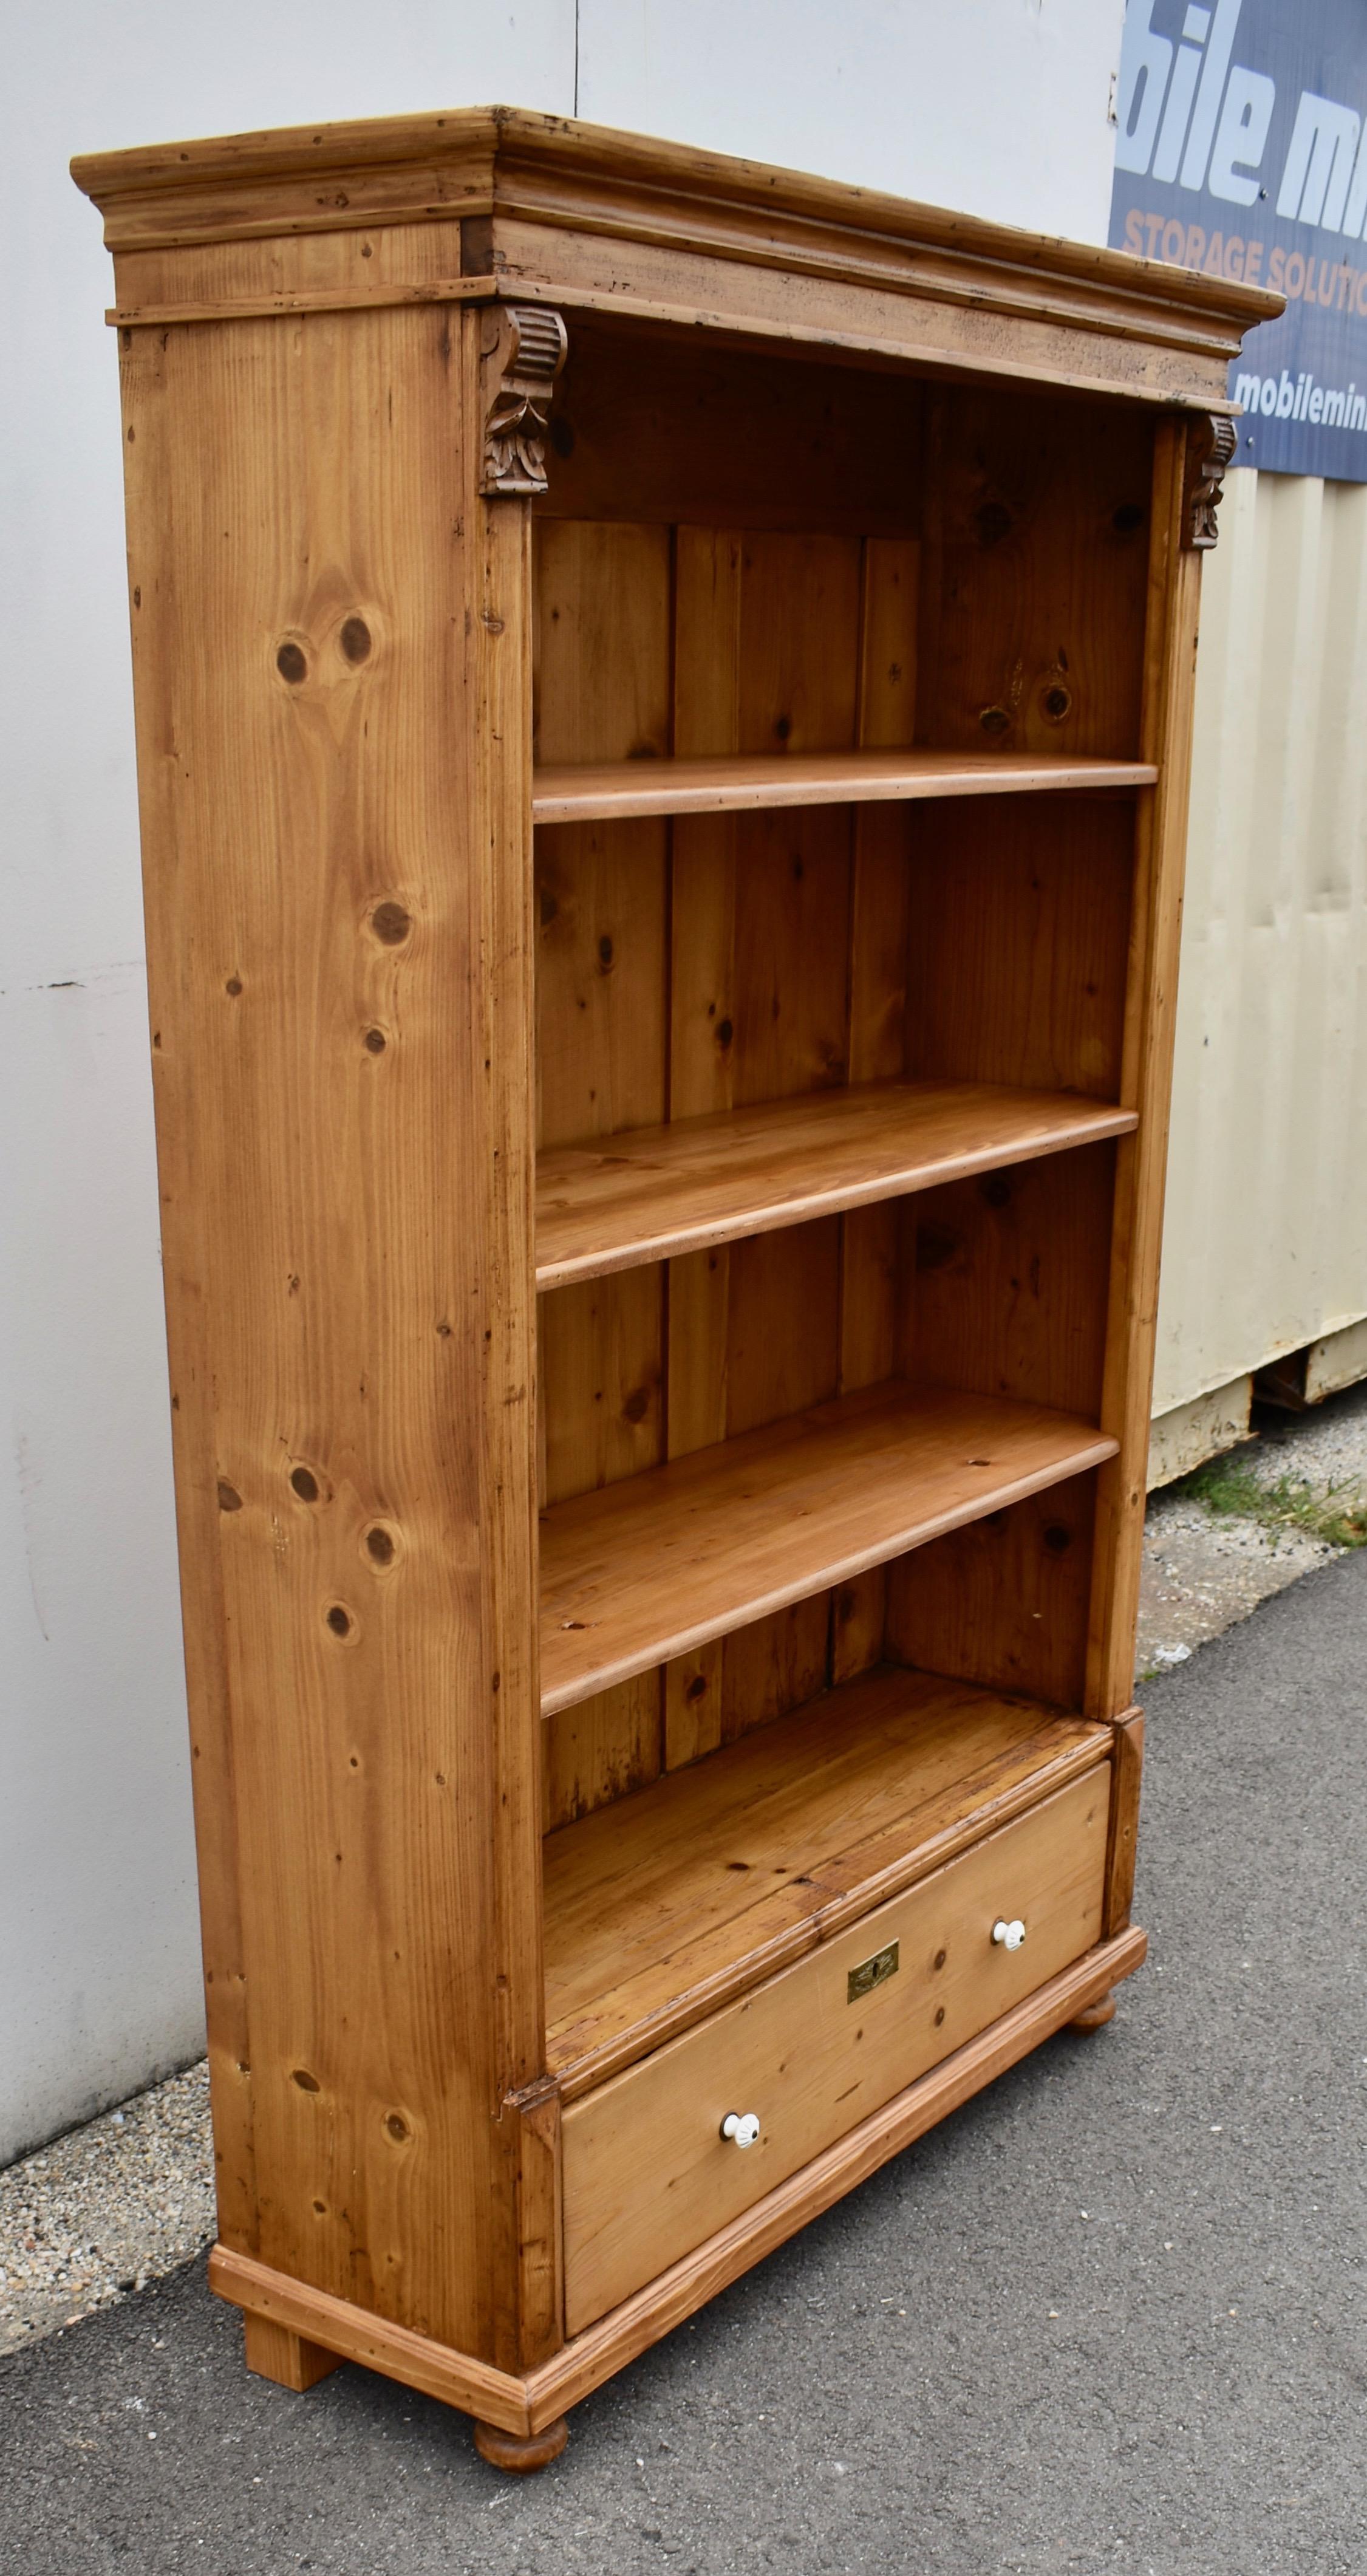 Antique pine bookcases are hard to find so the shell of this piece was provided by a vintage pine armoire. With one board width removed from the sides and the original backboards and crown molding retained, with the drawer reduced in depth, we get a